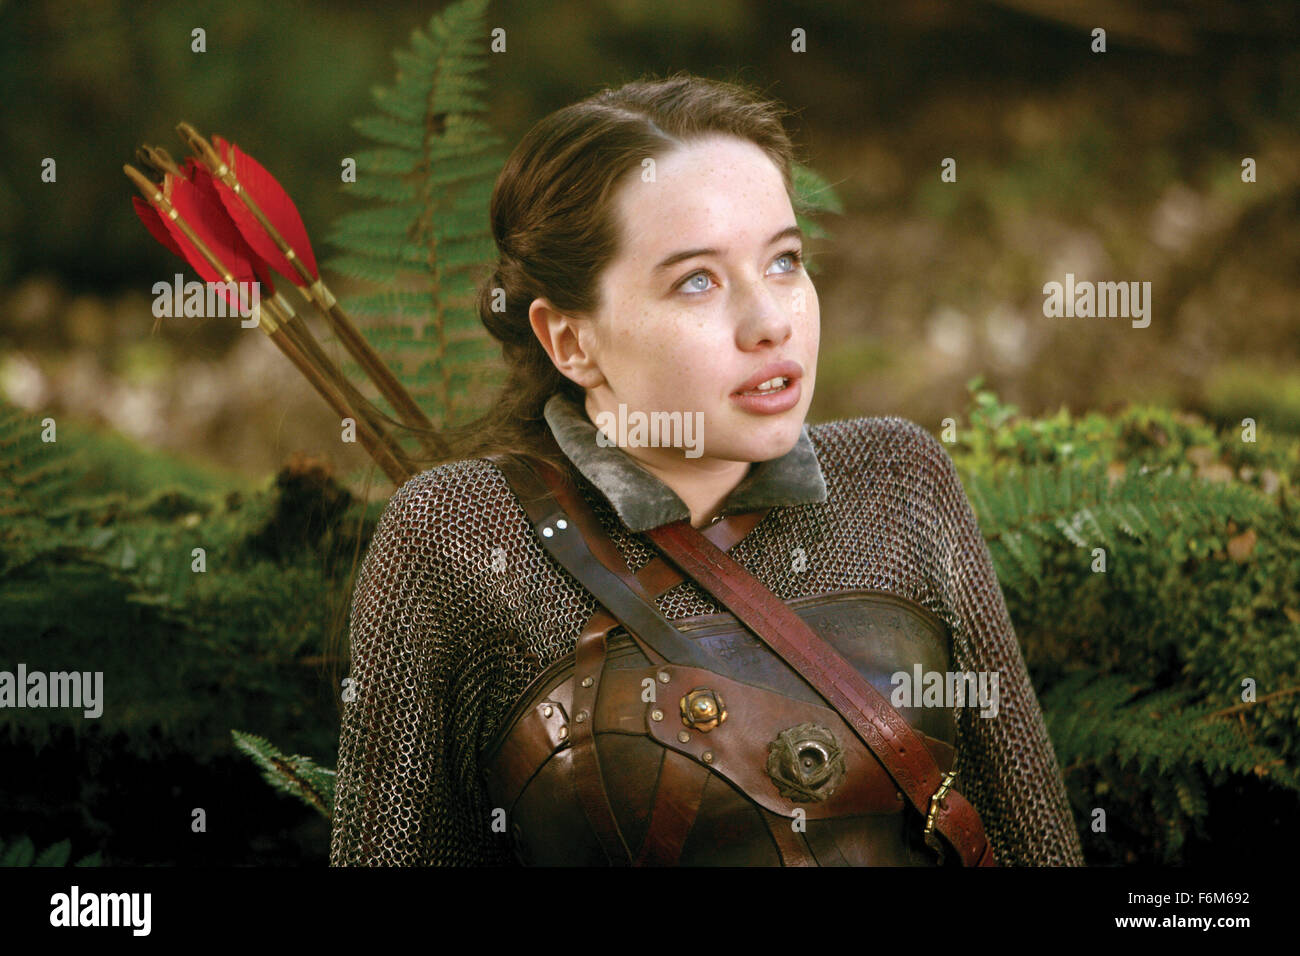 RELEASE DATE: May 16, 2008. MOVIE TITLE: The Chronicles of Narnia: Prince Caspian. STUDIO: Walt Disney Pictures. PLOT: The Pevensie siblings return to Narnia, where they are enlisted to once again help ward off an evil king and restore the rightful heir to the land's throne, Prince Caspian. PICTURED: ANNA POPPLEWELL as Susan Pevensie. Stock Photo